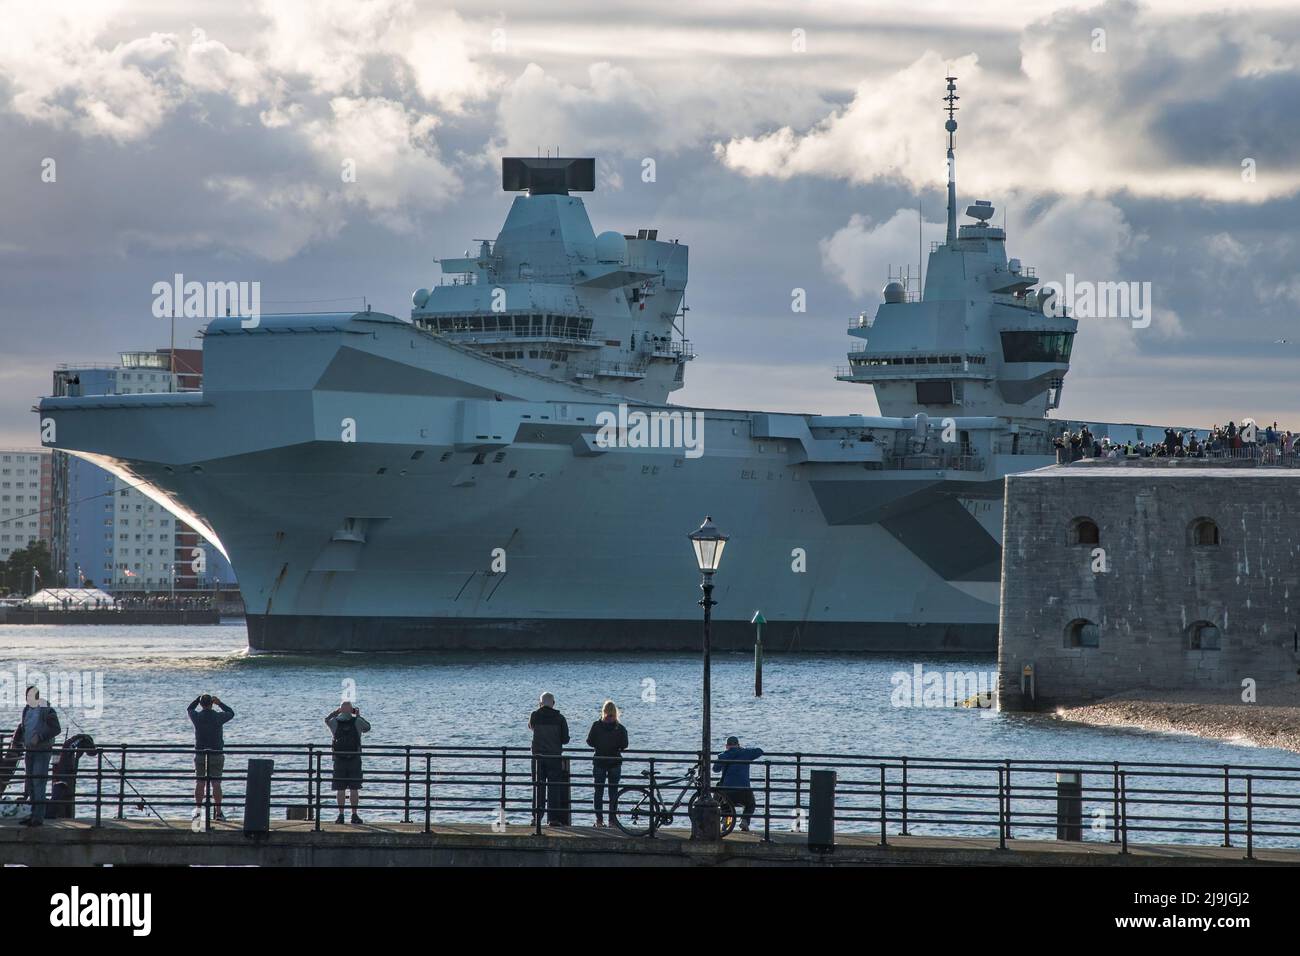 The Royal Navy aircraft carrier HMS Prince of Wales (R09) departed Portsmouth, UK on the evening of 23/5/2022 to resume NATO command ship duties. Stock Photo